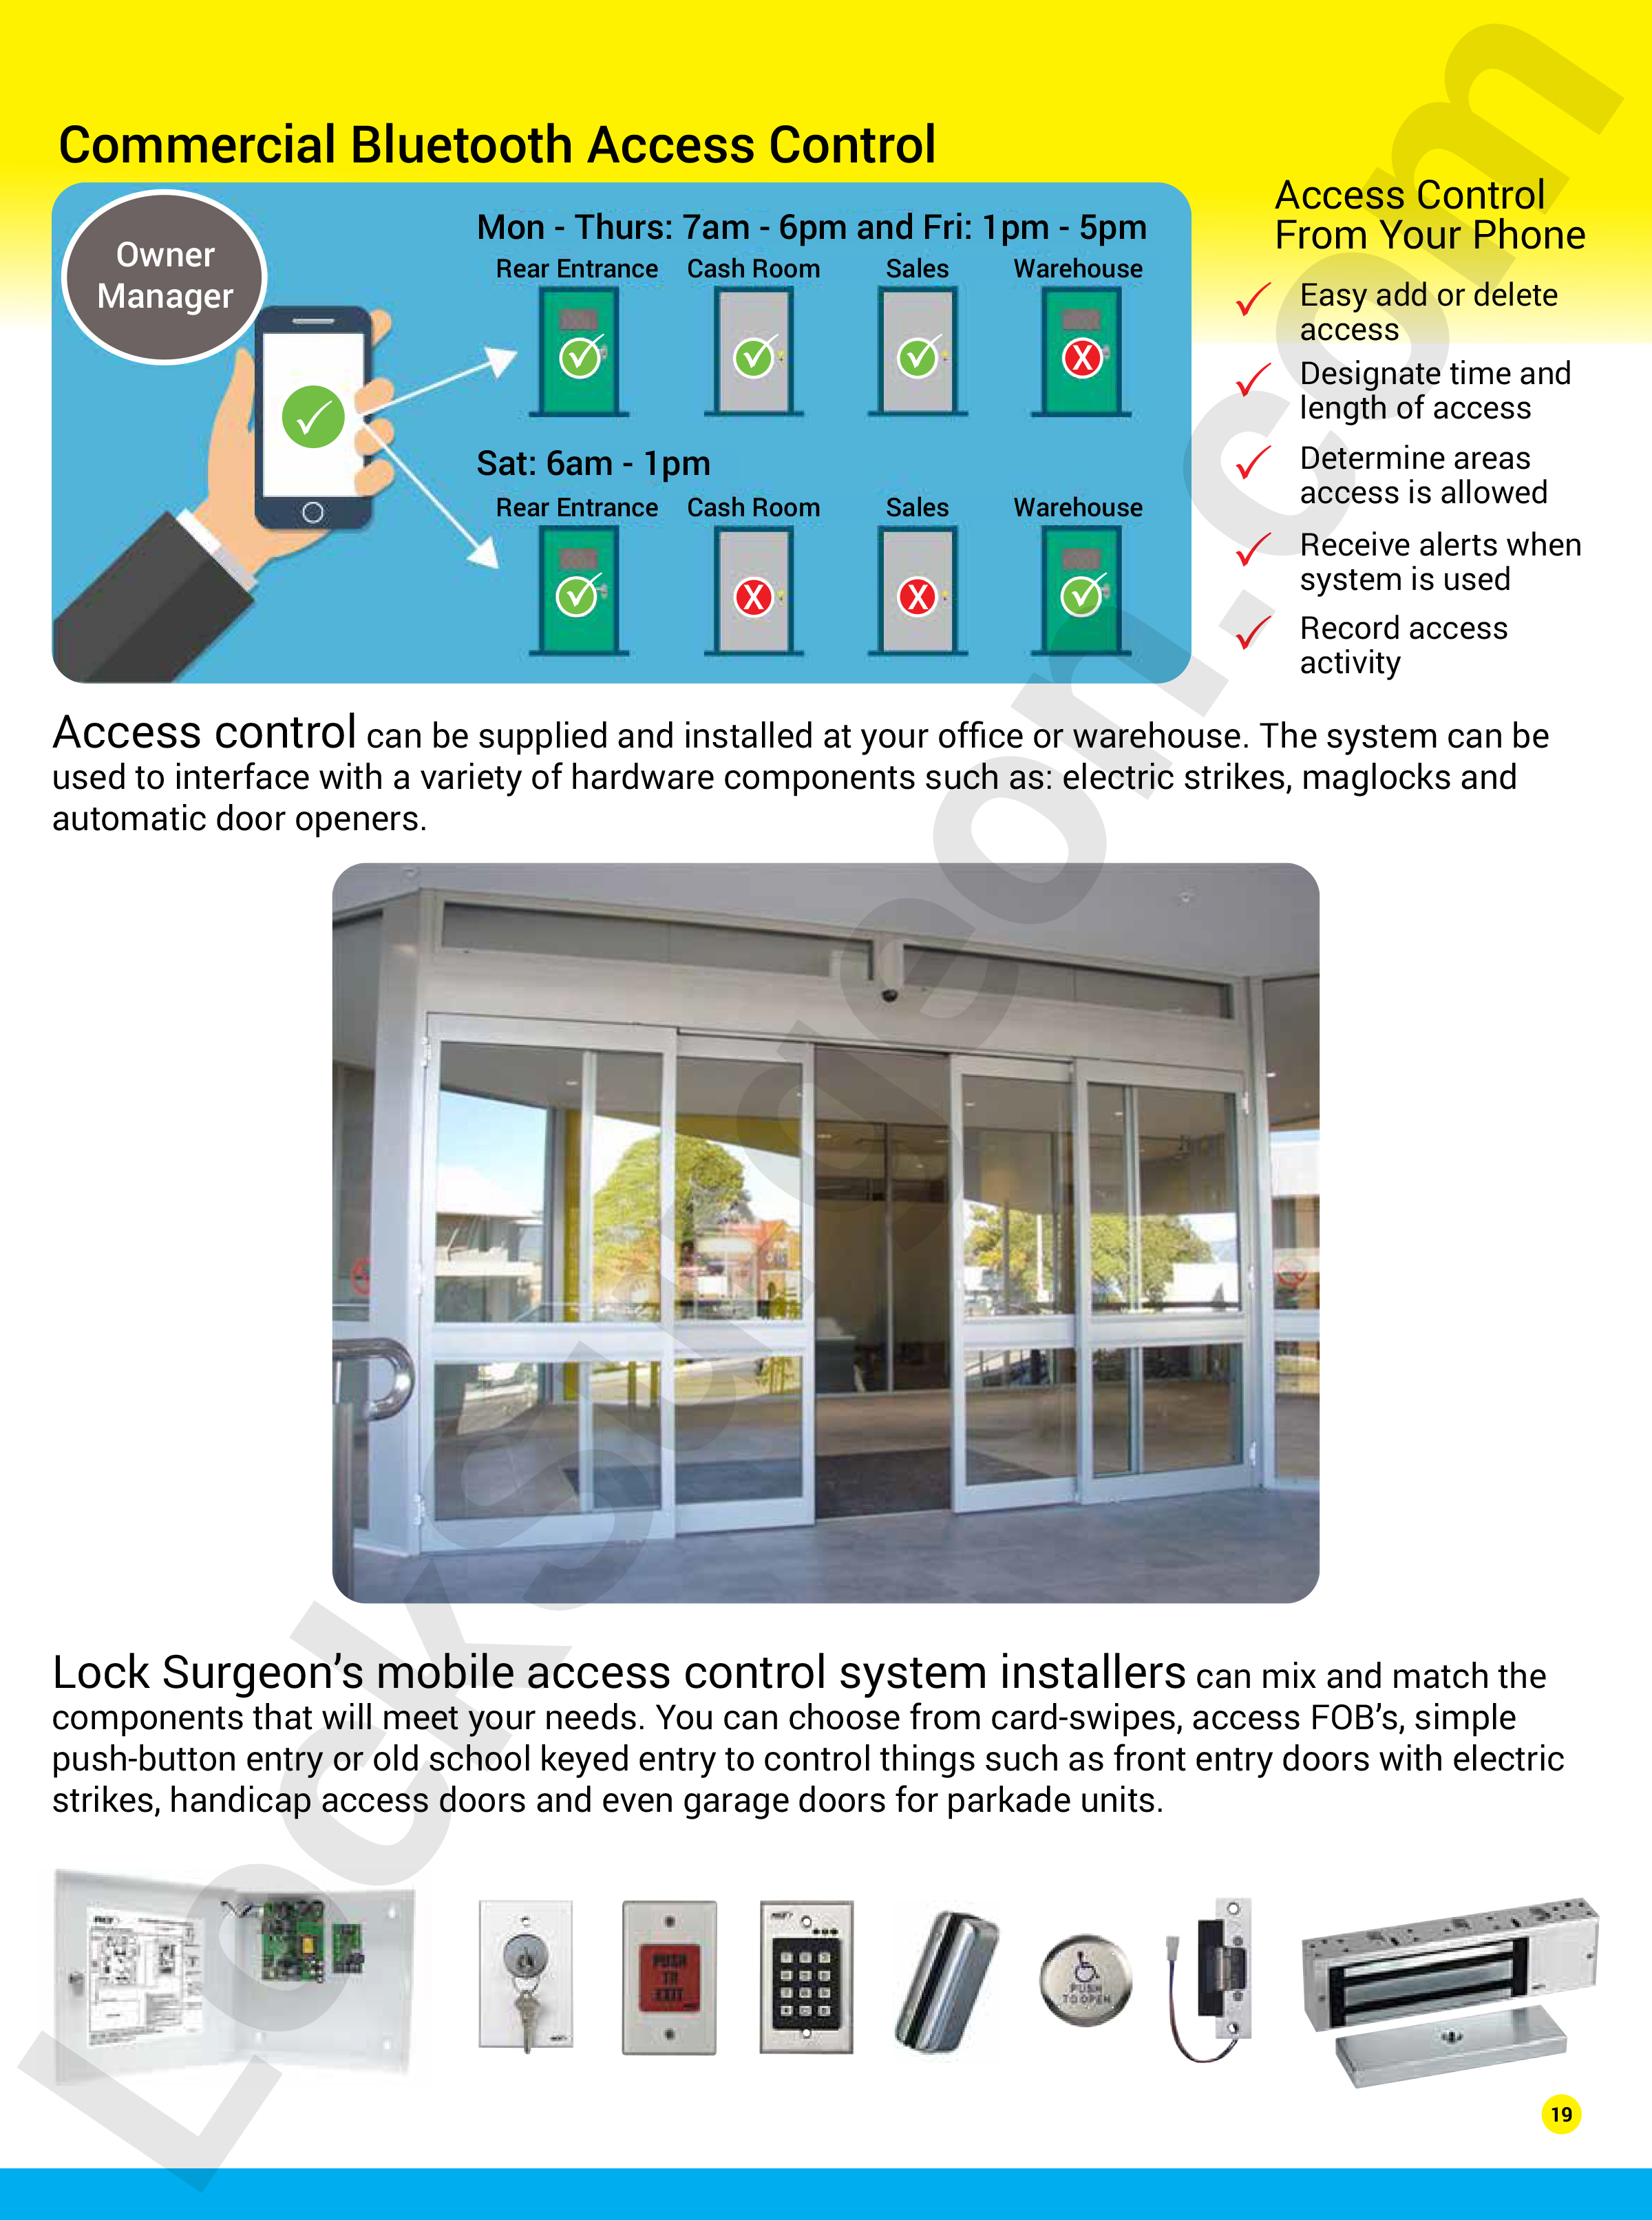 Commercial bluetooth access control supplied and installed at your office or warehouse by Lock Surgeon or Door Surgeon technicians.